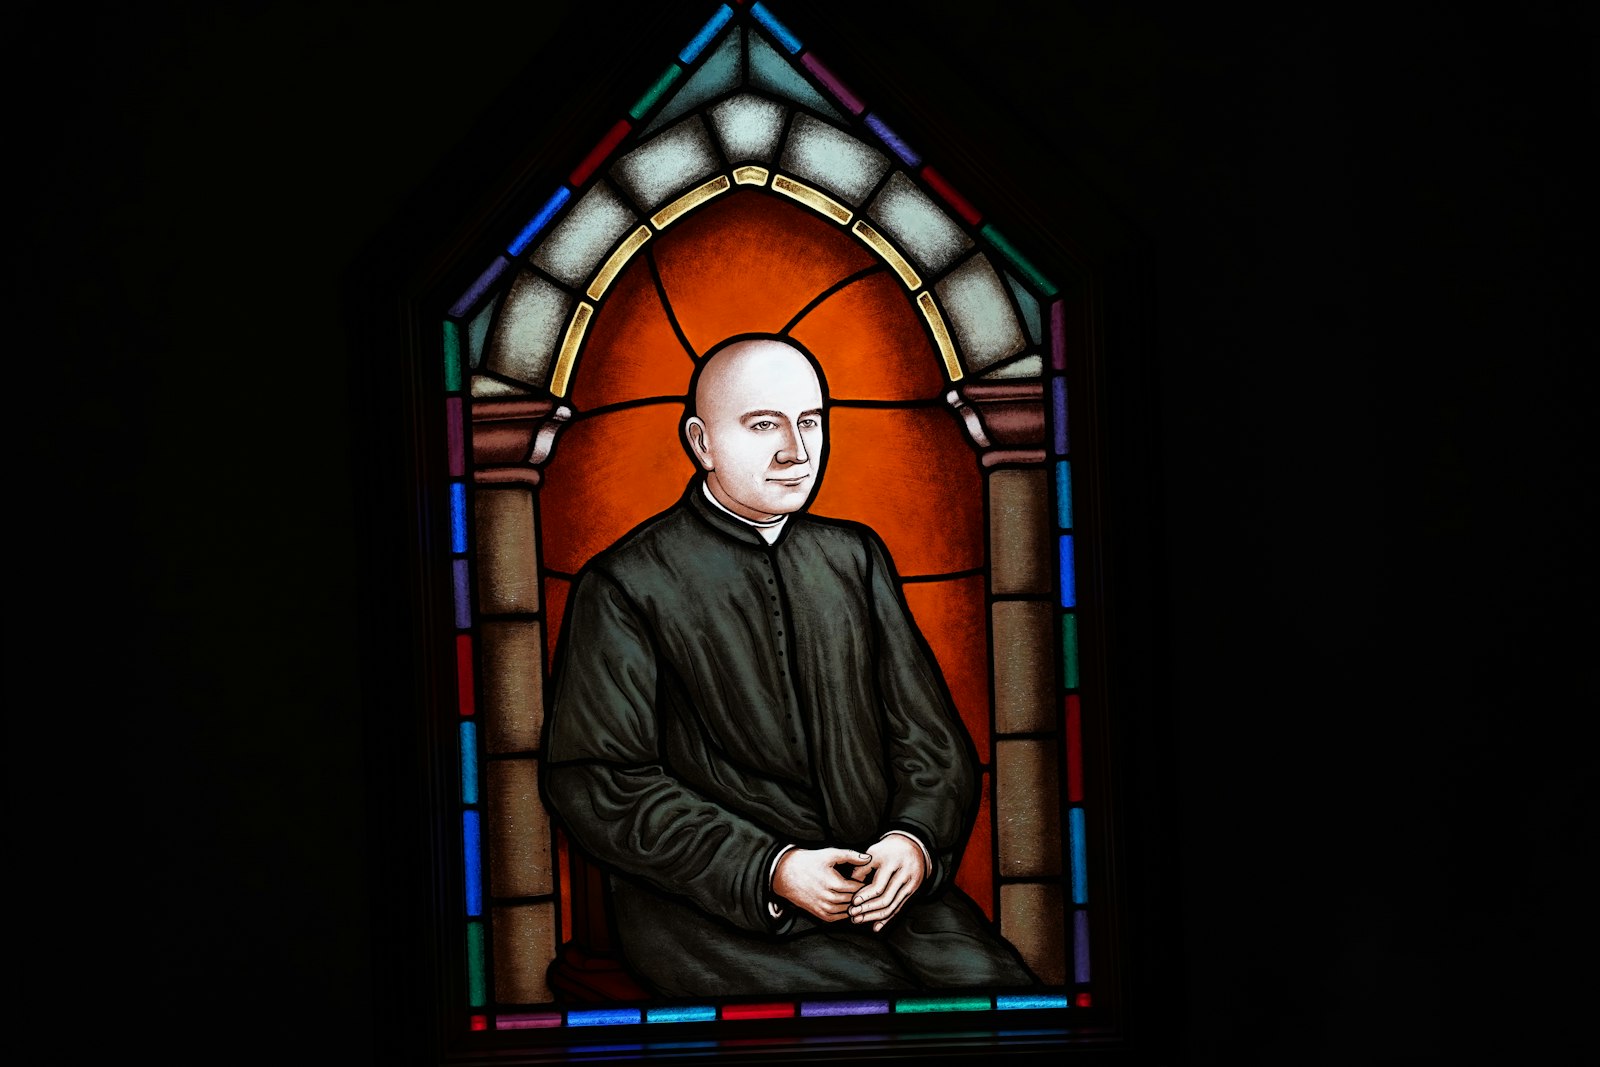 A stained-glass window of Fr. Ignacy Posadzy, the co-founder of the Society of Christ, is pictured at the rectory of Our Lady of Czestochowa Parish in Sterling Heights, which at one time was the provincial headquarters of the Society of Christ in the United States.